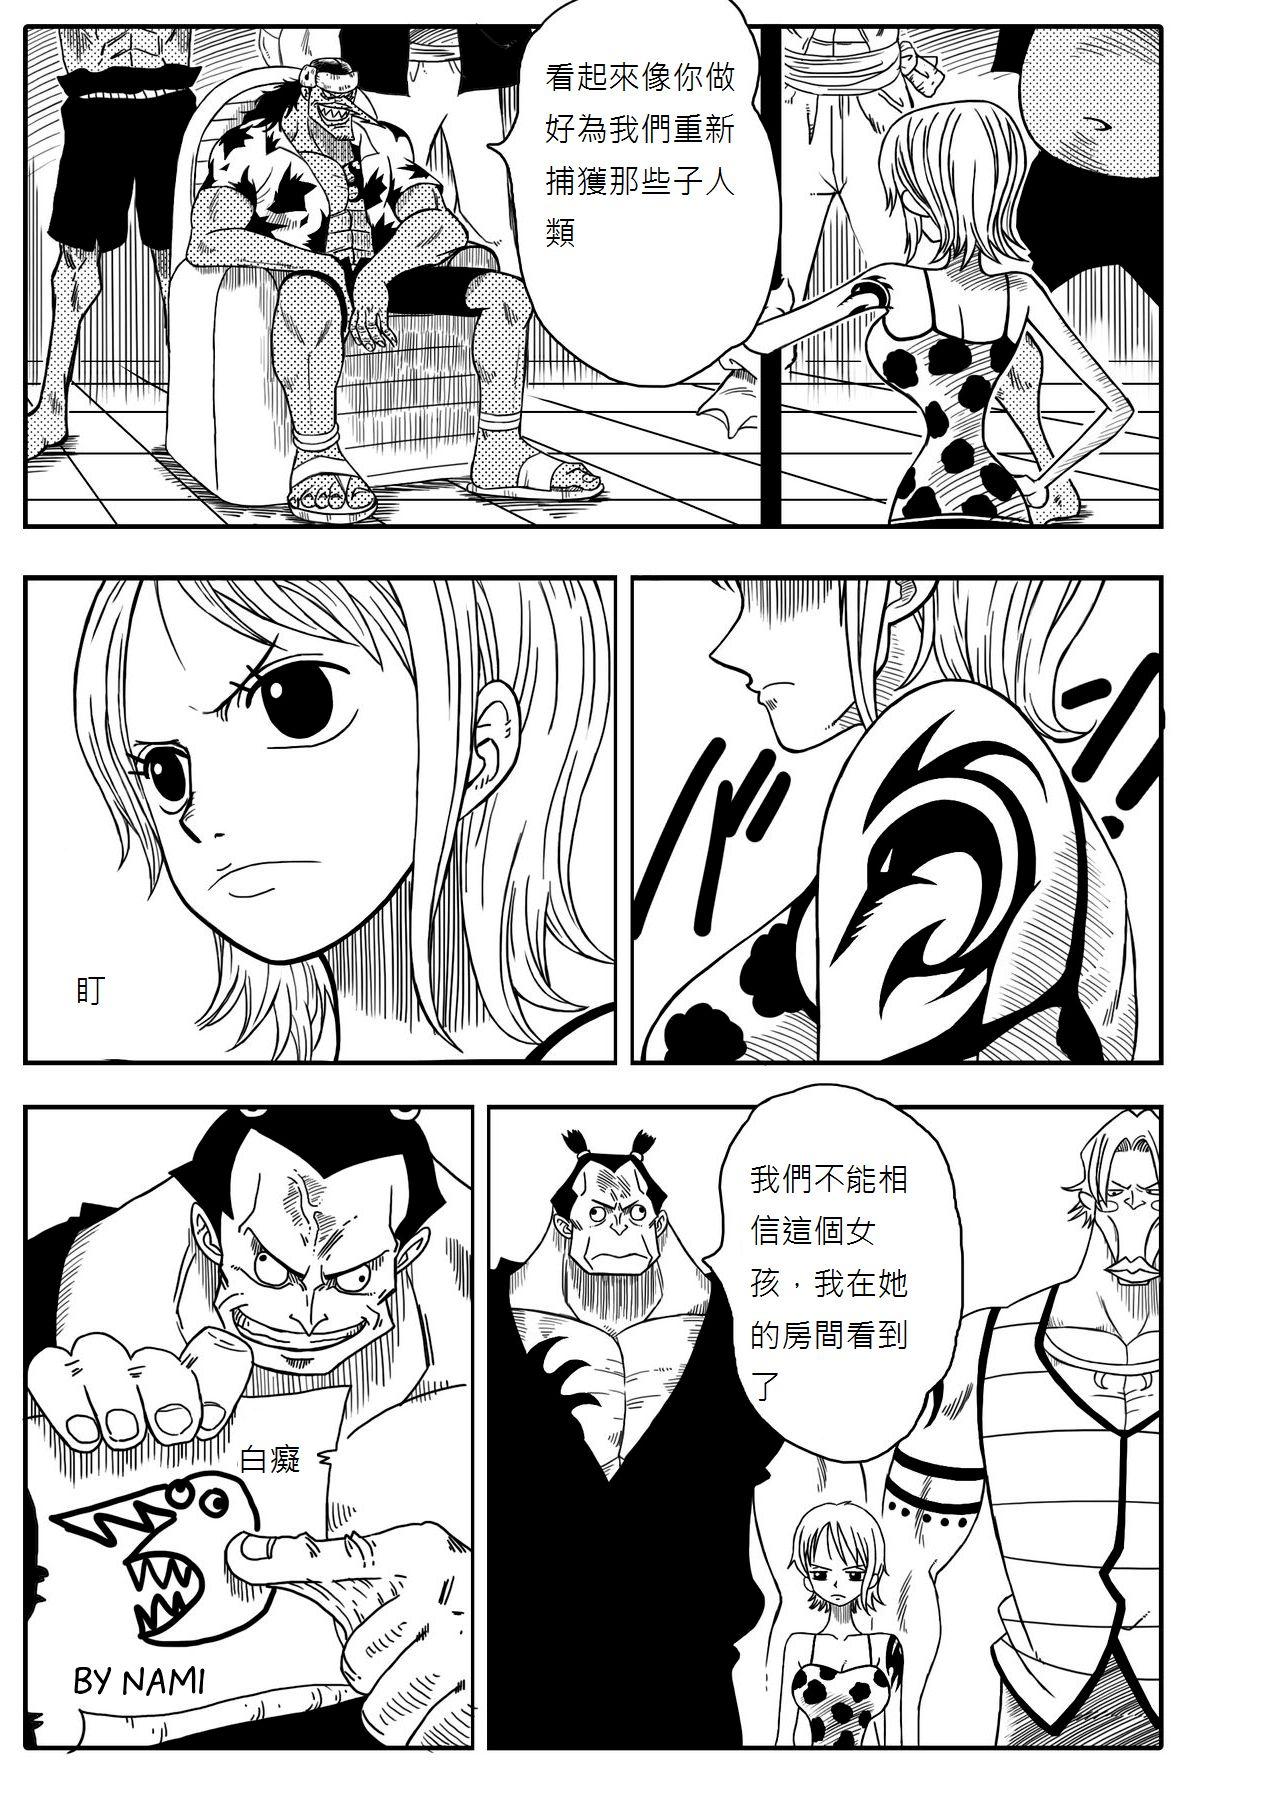 Cash Two Piece - Nami vs Arlong - One piece Hot Naked Girl - Page 4